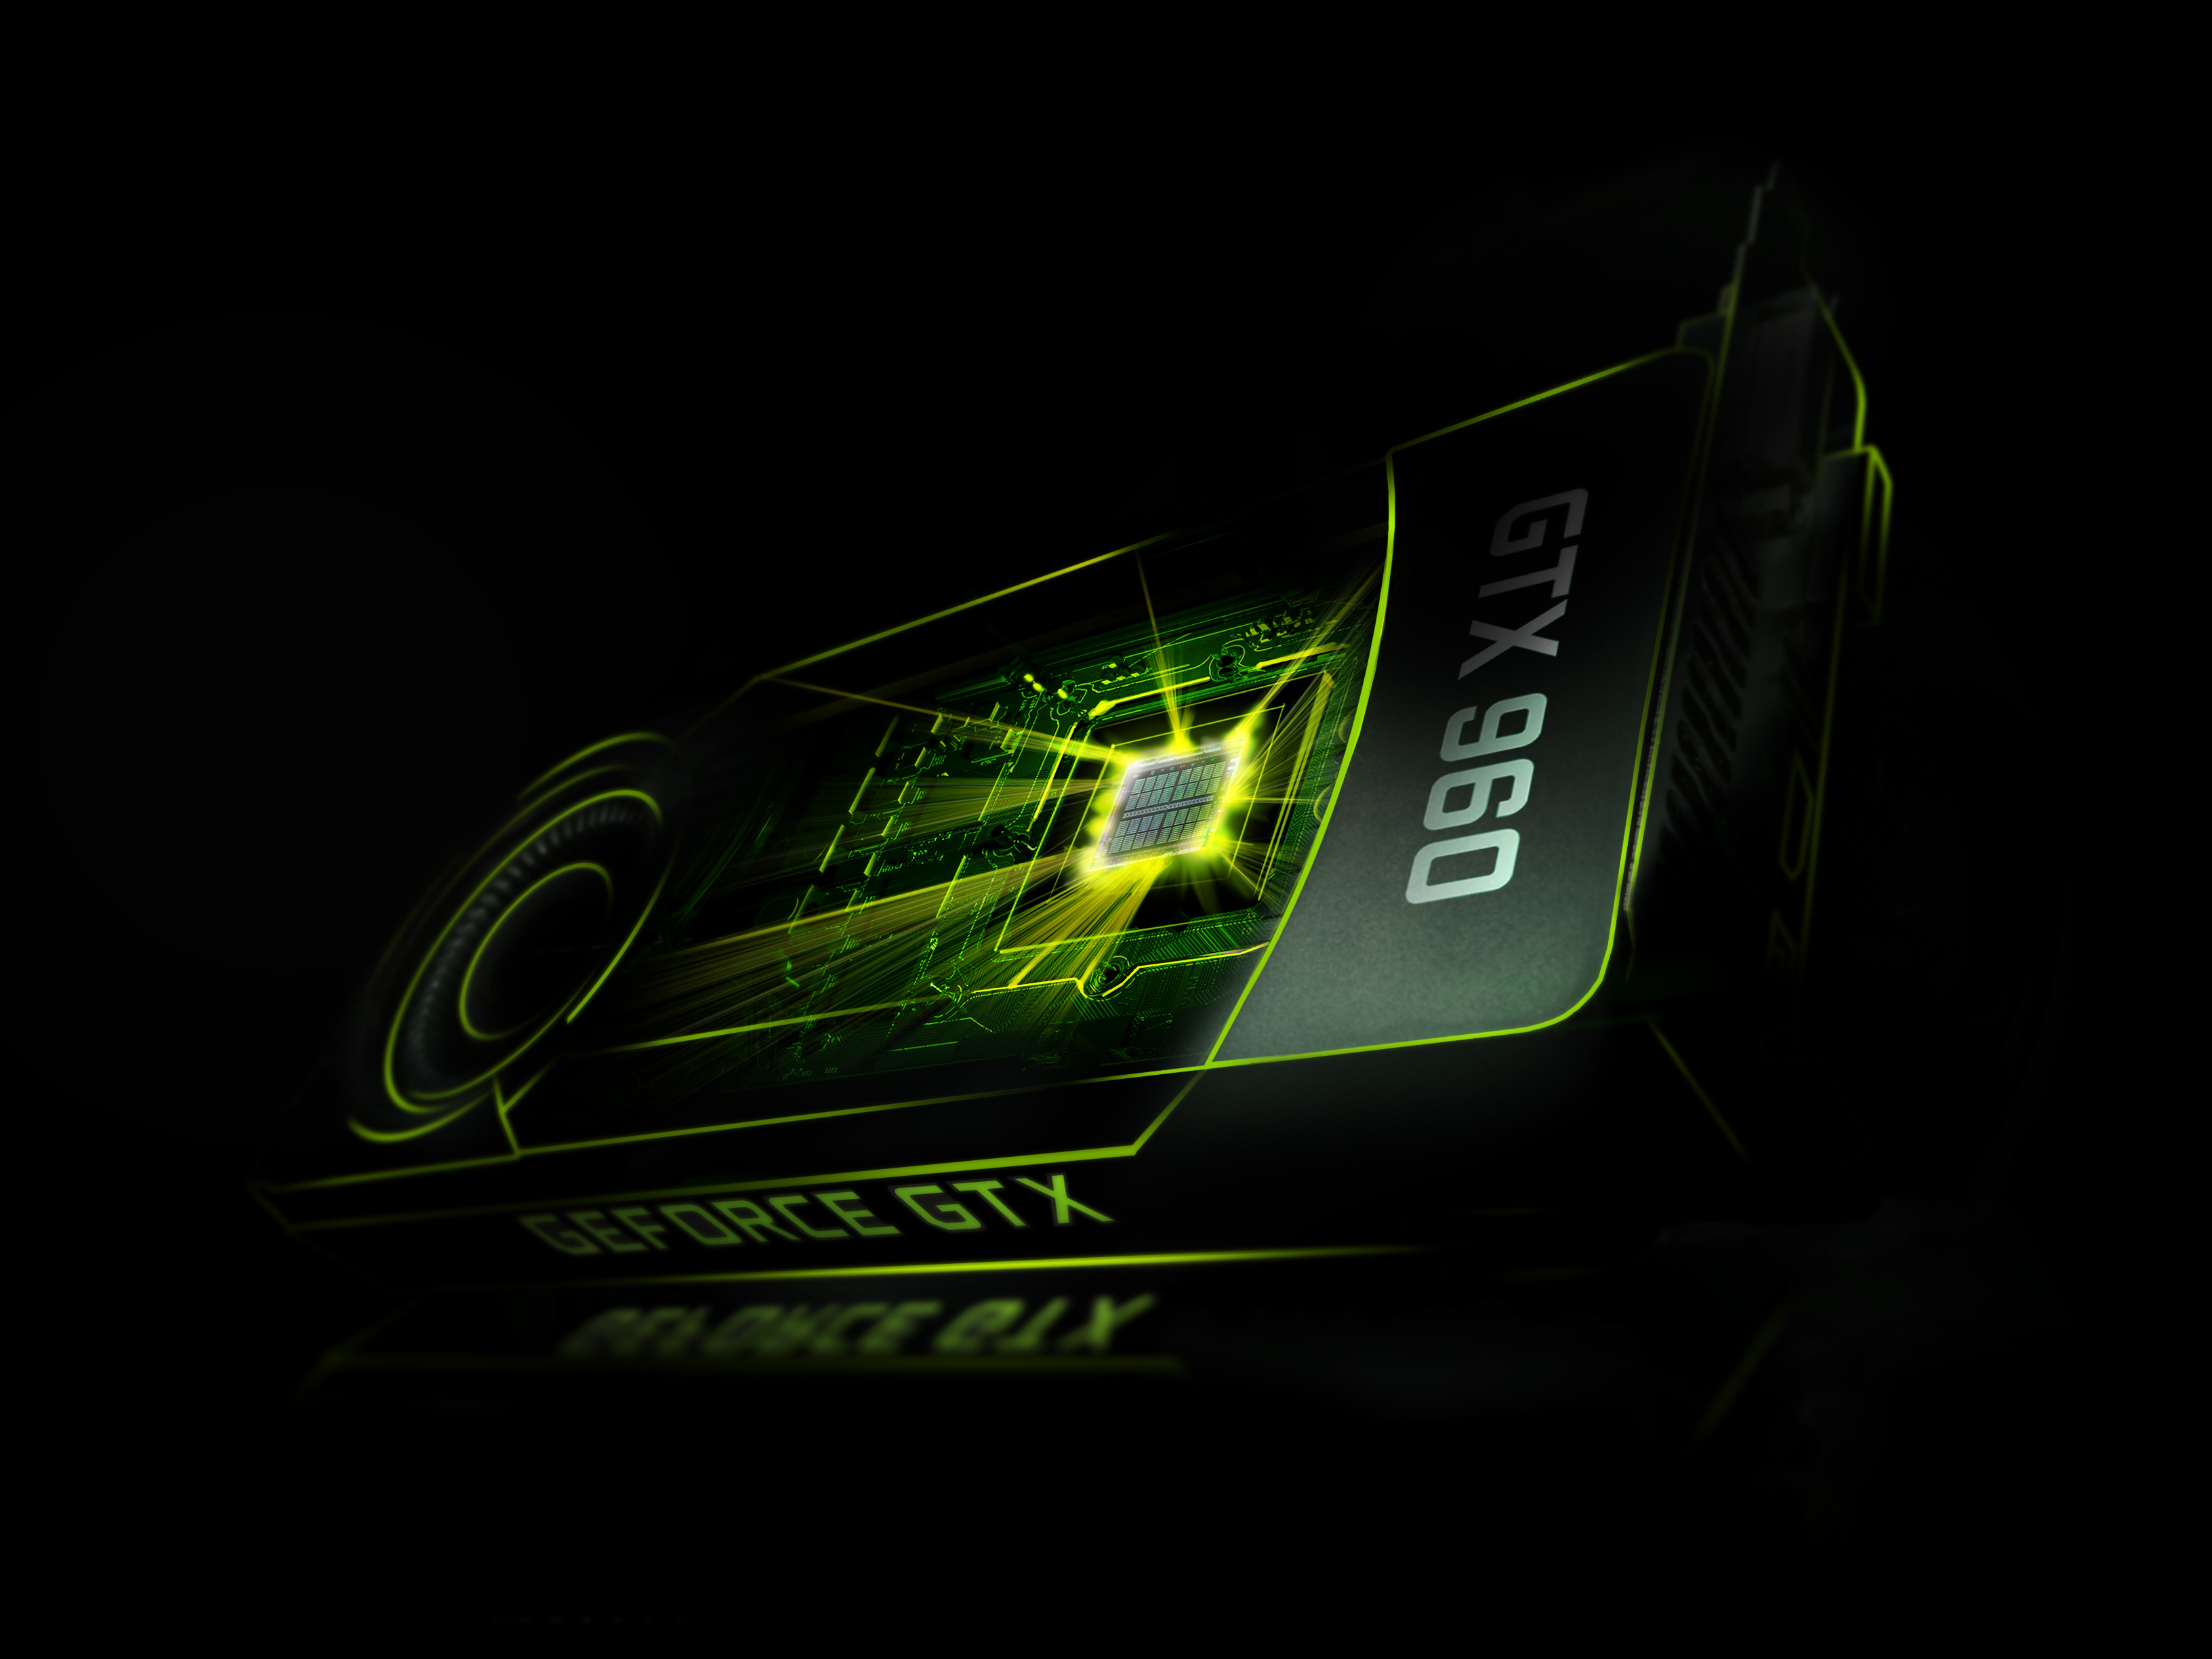 Nvidia Launches Geforce GTX 960 Mid-Range Graphics Card